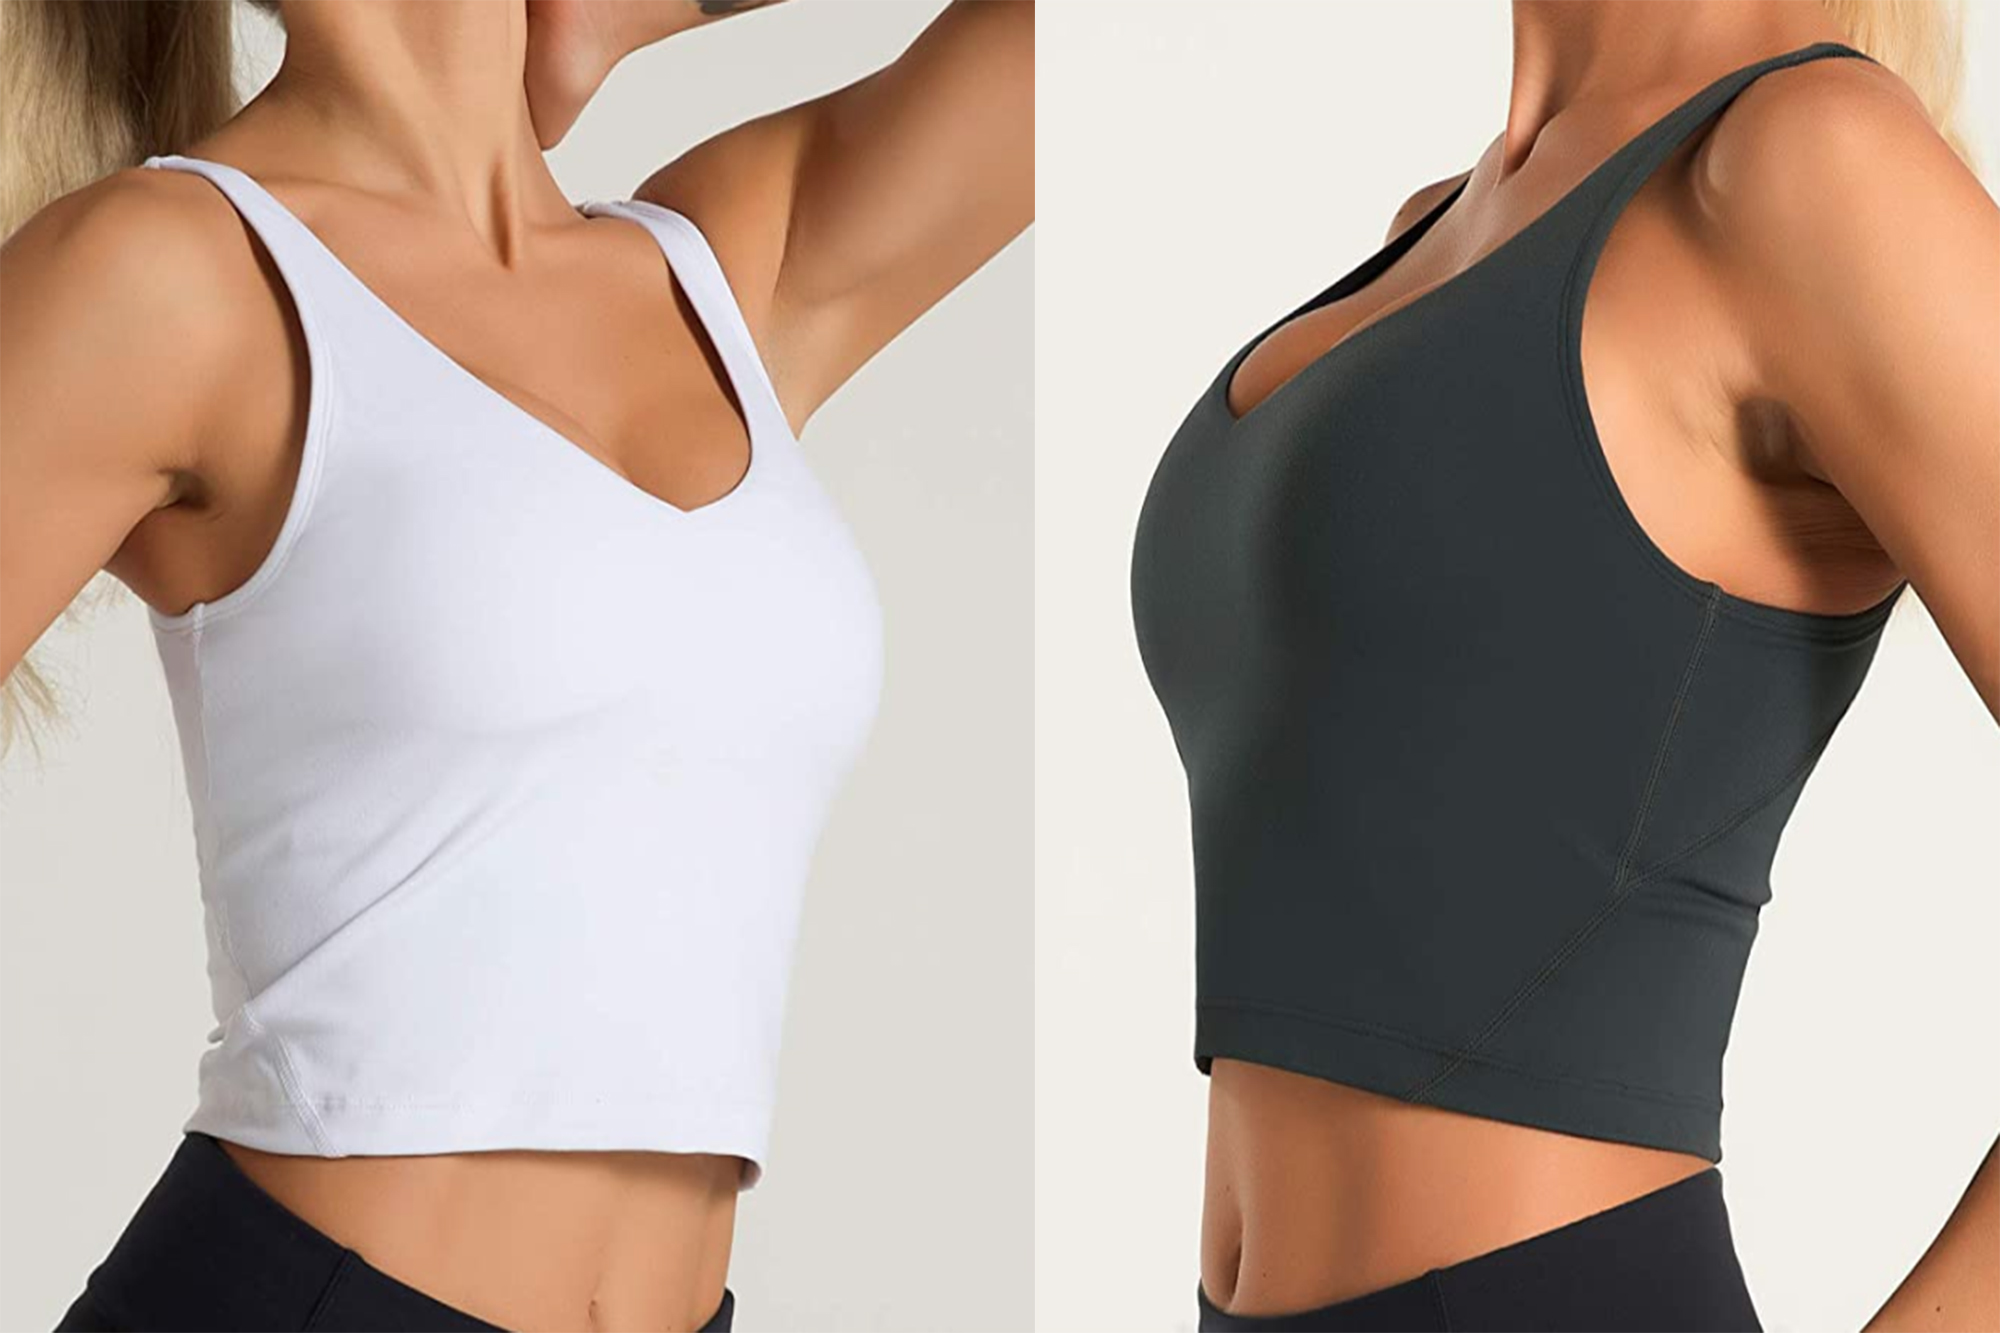 The Gym People Yoga Tank That Shoppers Say Is Lululemon-Quality